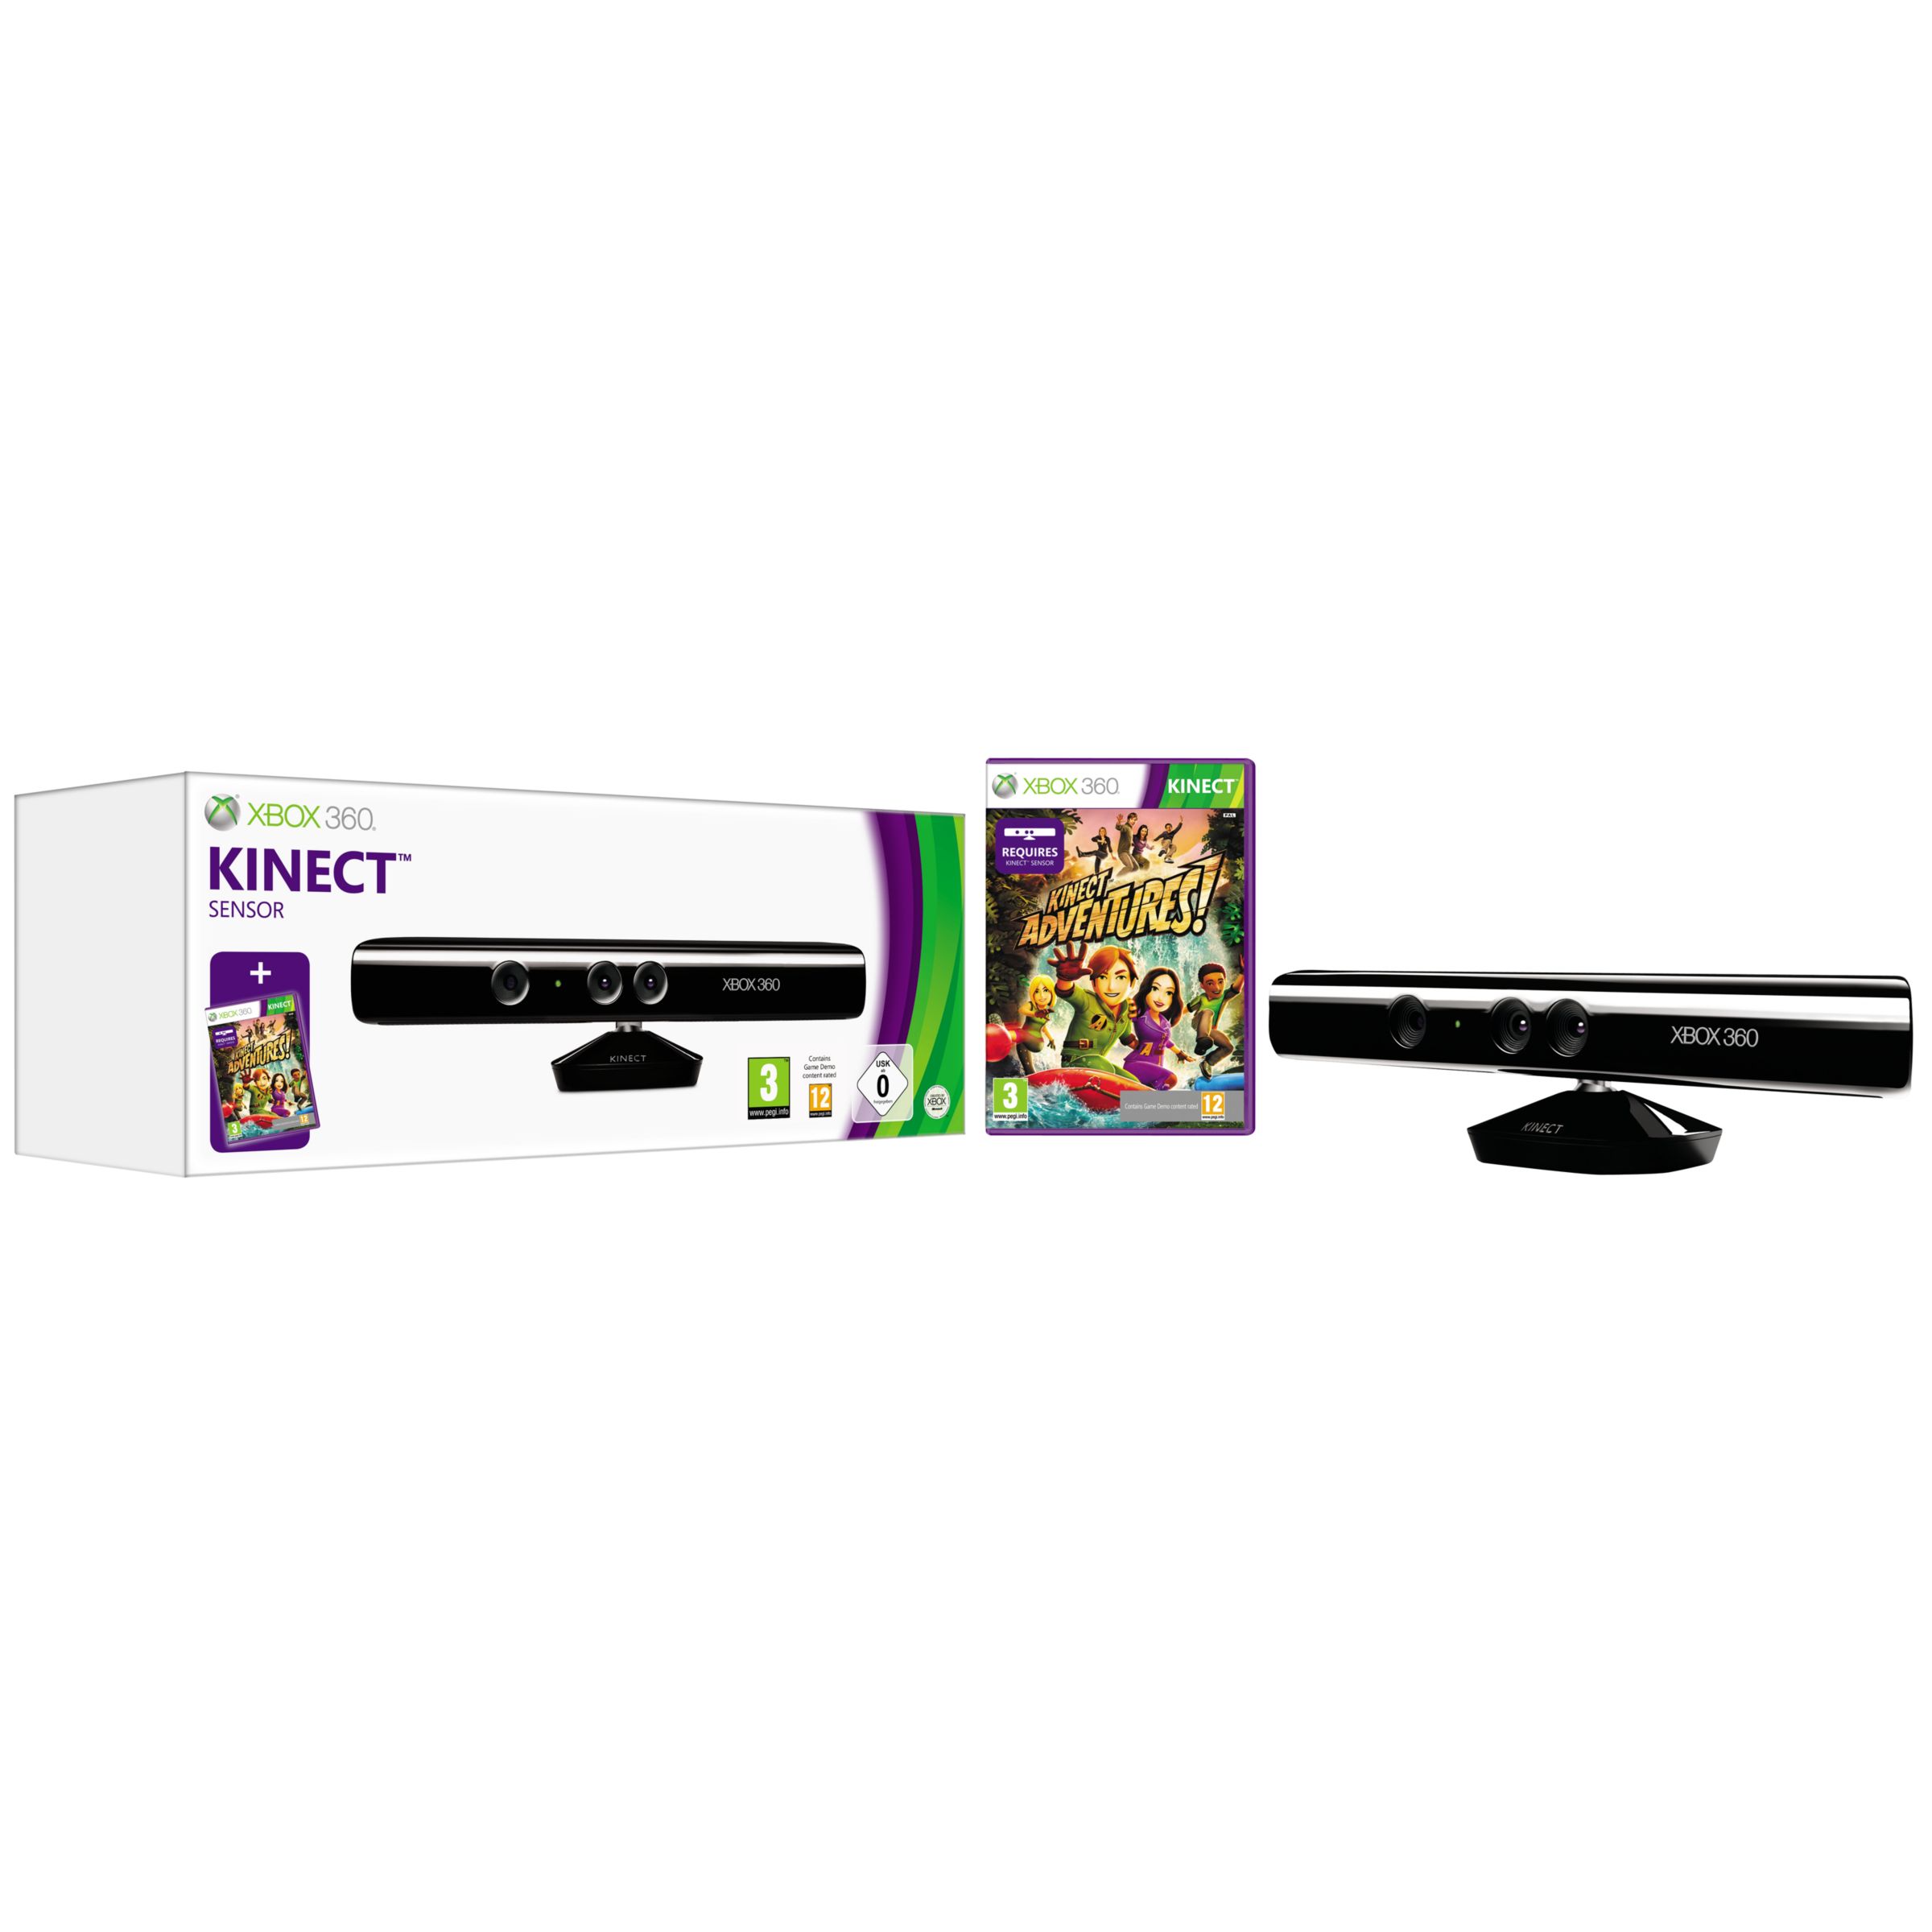 Microsoft Kinect Controller, Sports & Joyride for Xbox 360 at John Lewis